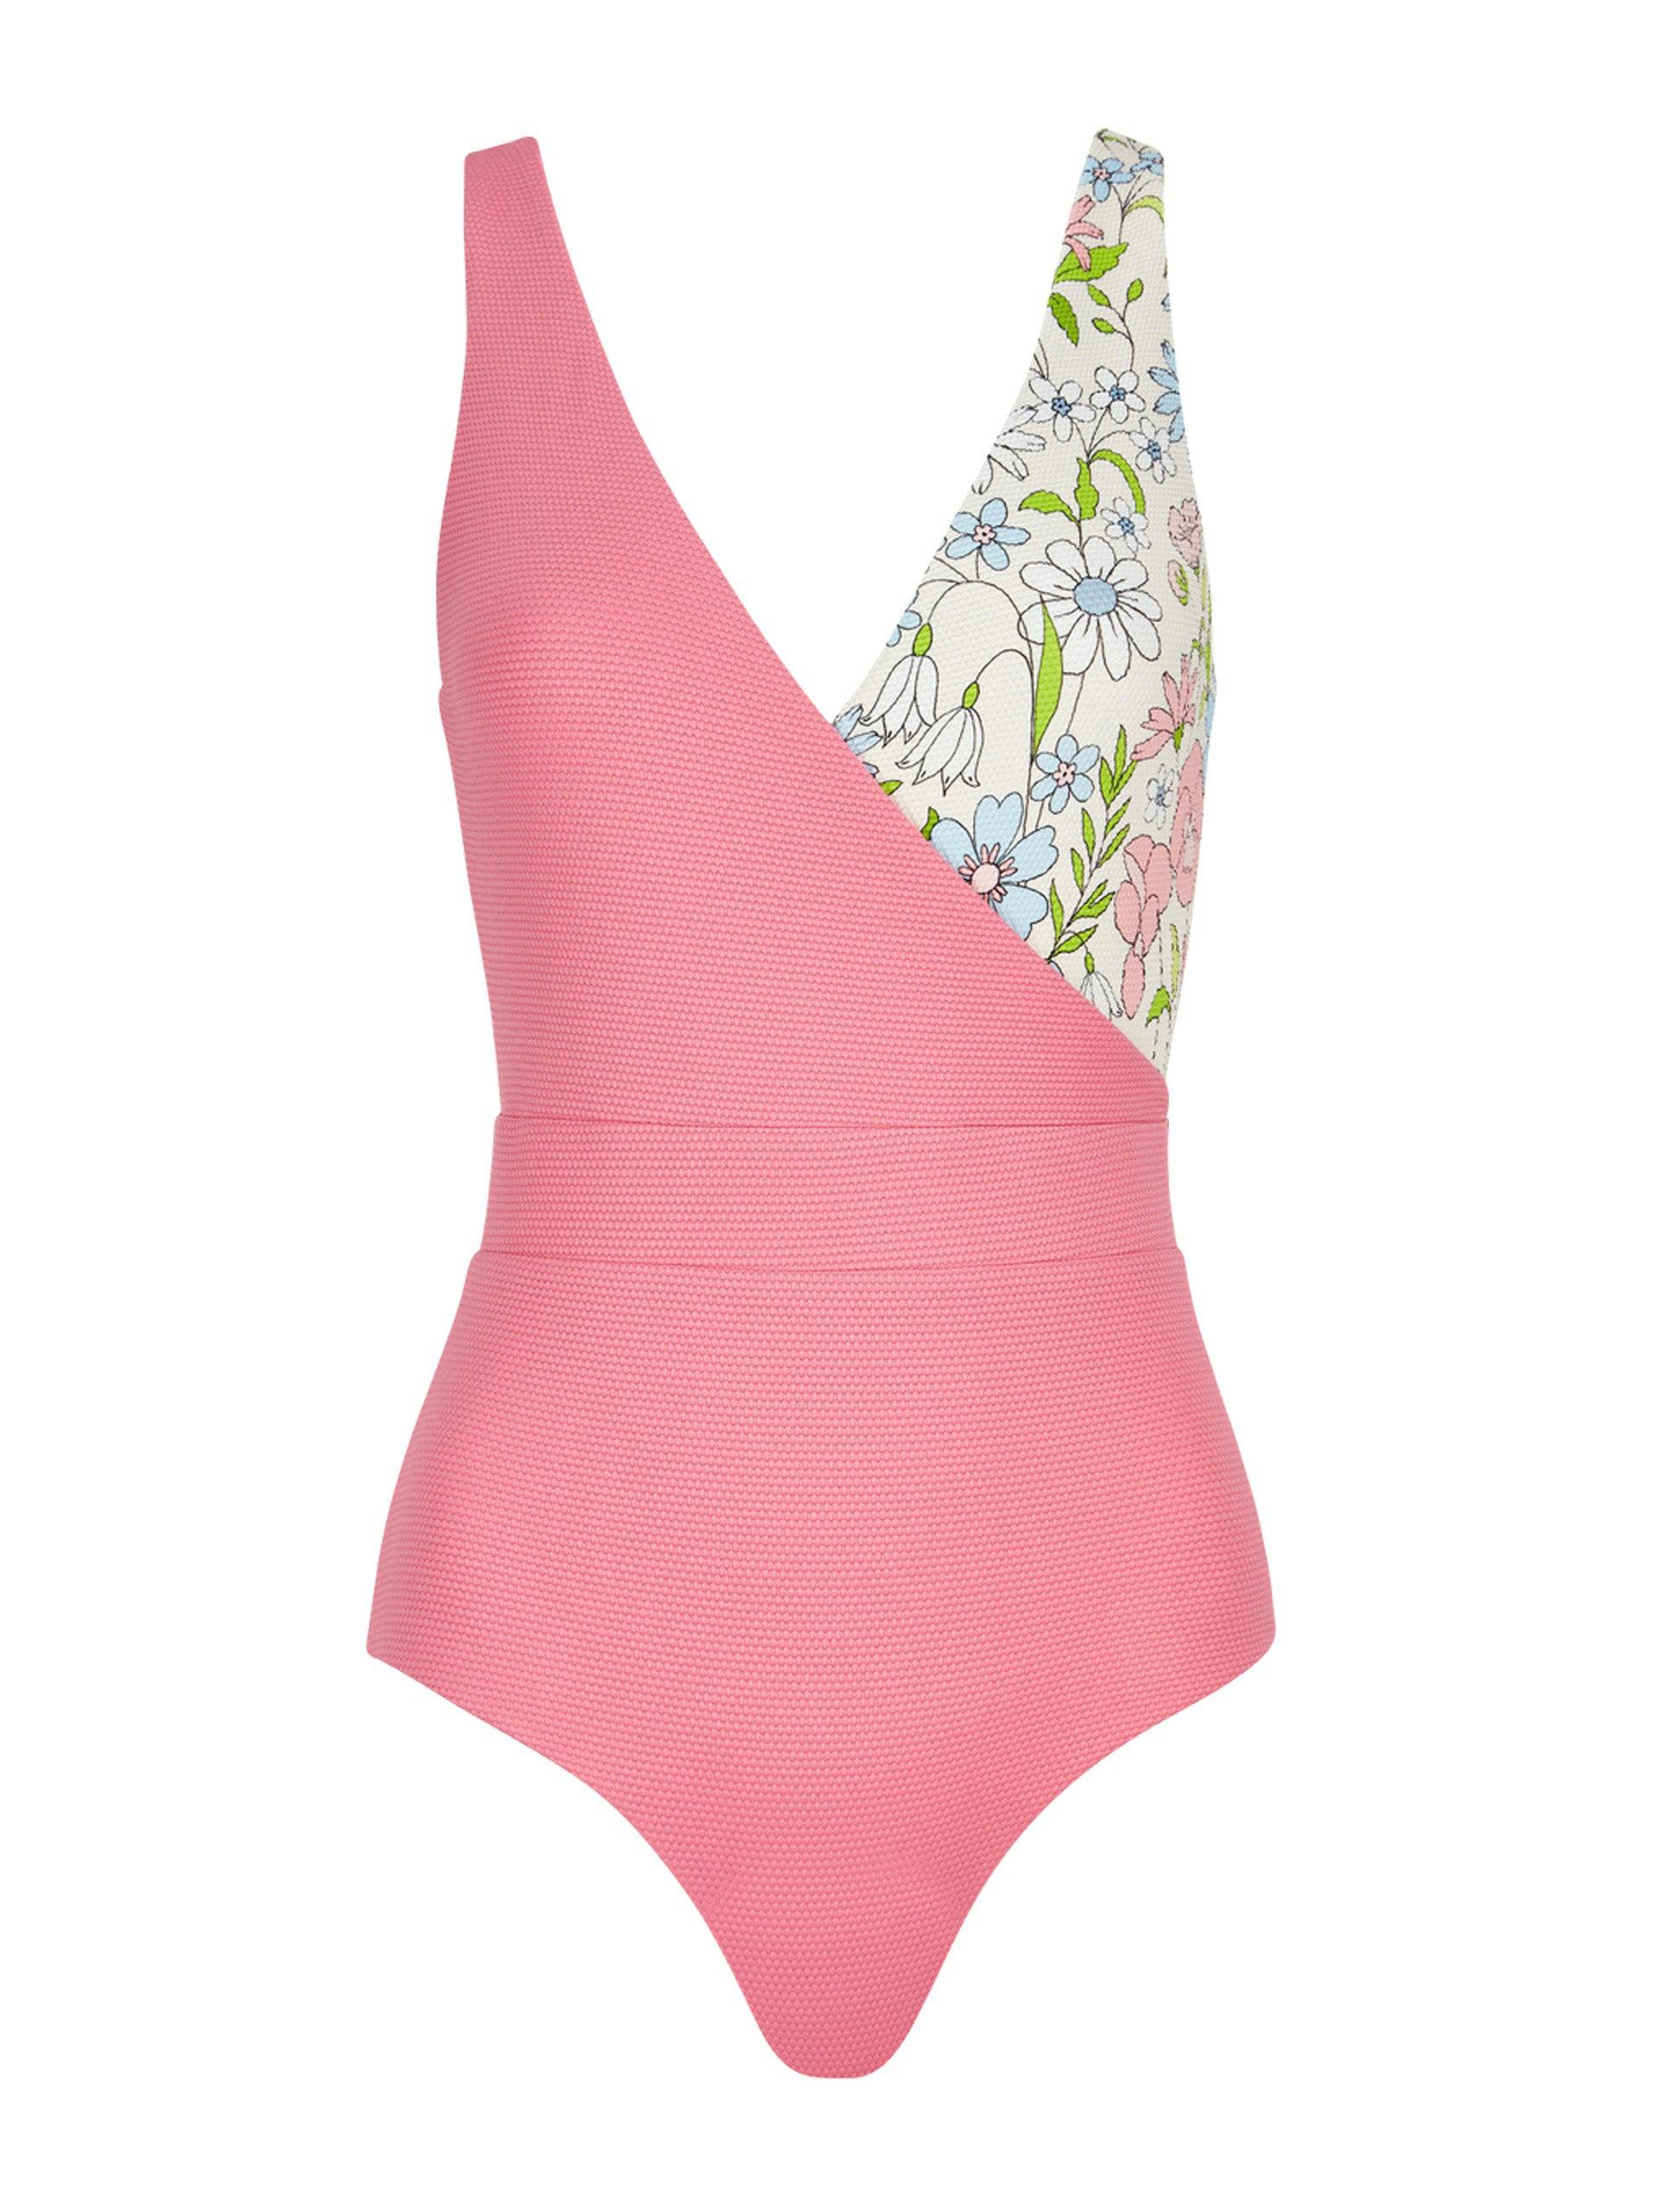 Asymmetric pink and summer meadow Ashley wrap-over swimsuit